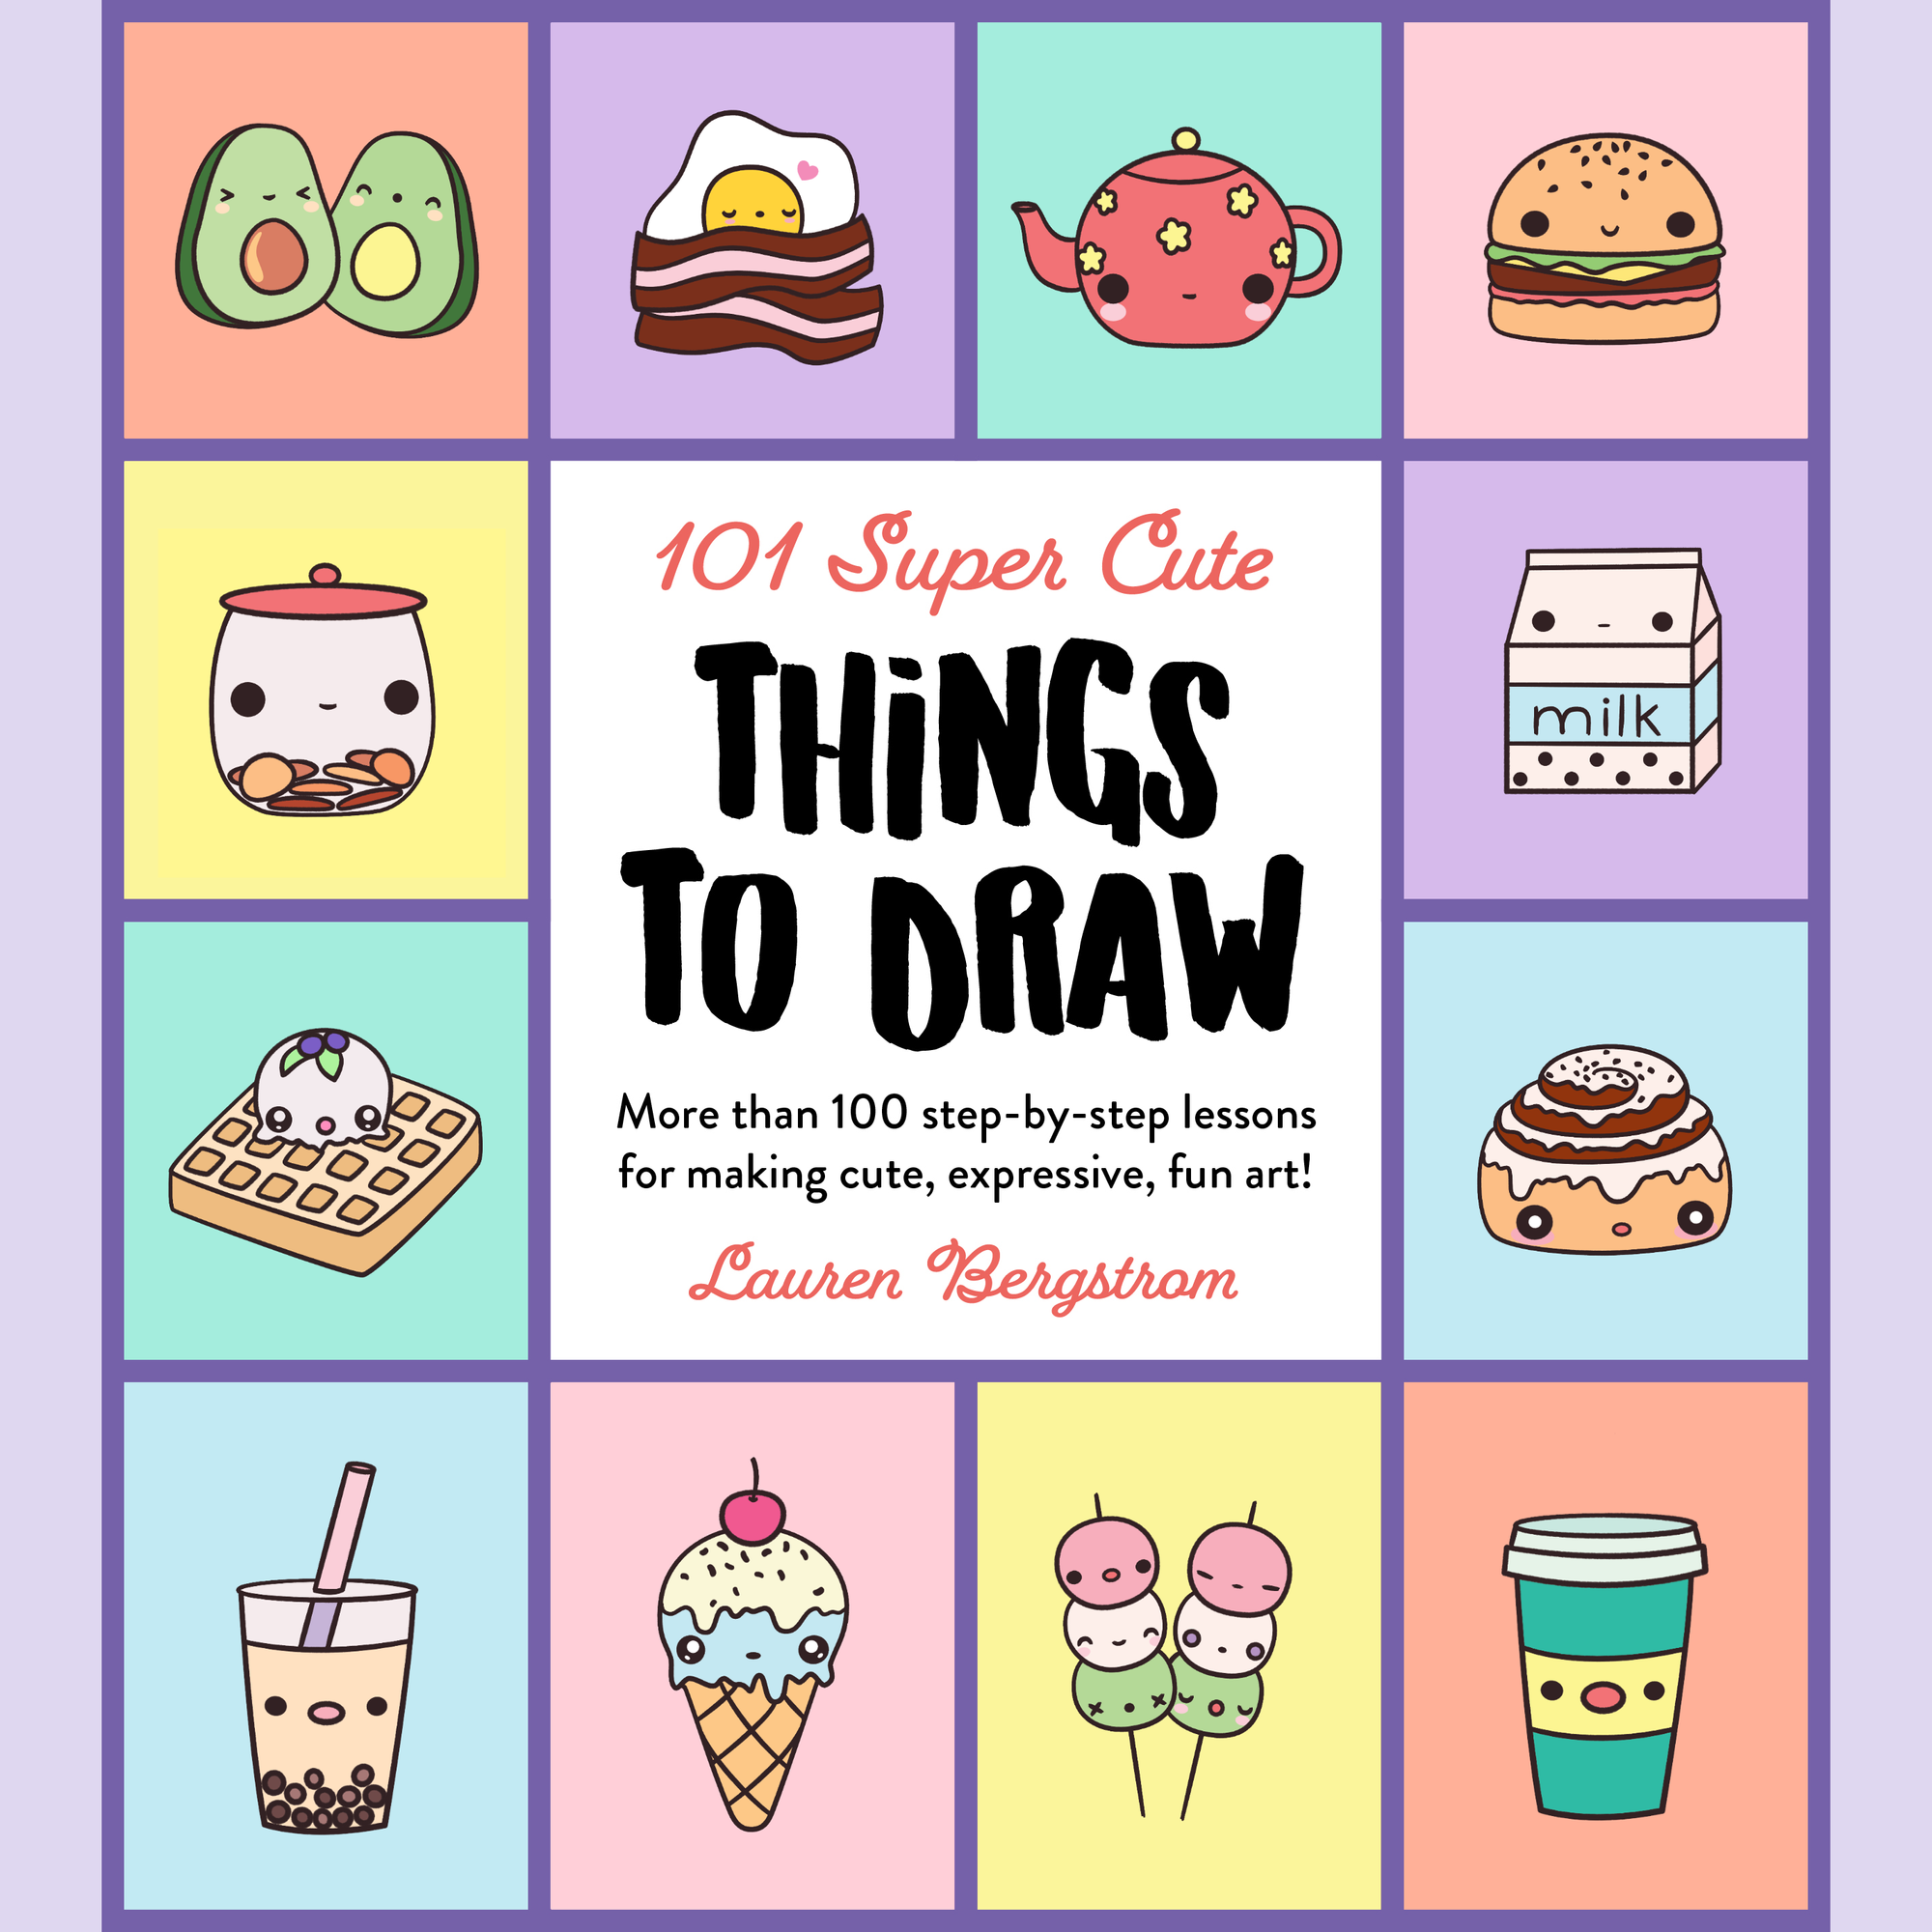 101 Super cute things to draw